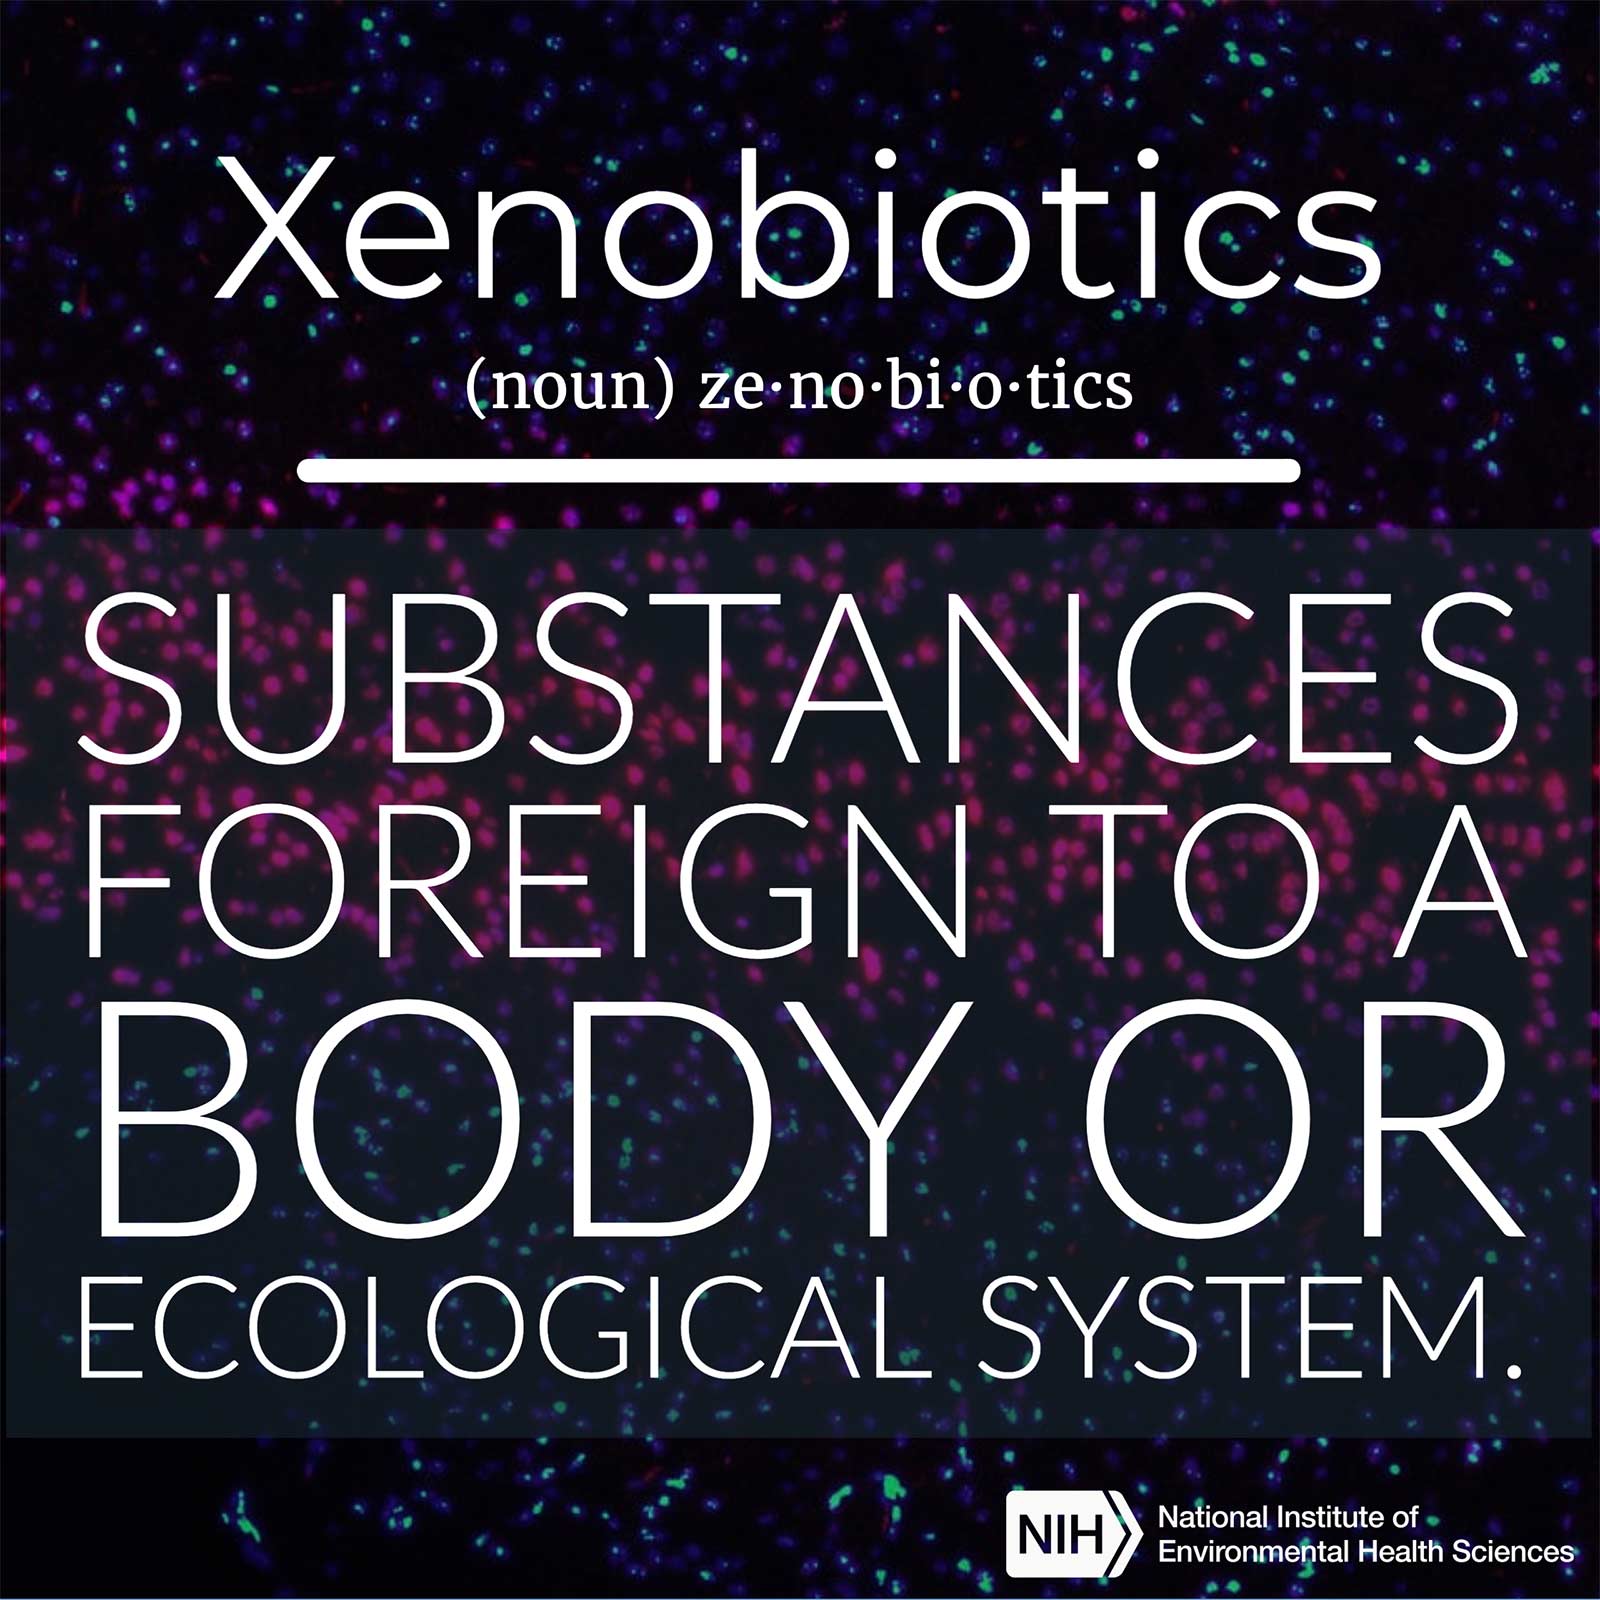 xenobiotics (noun) defined as &#39;substances foreign to a body or ecological system.&#39;